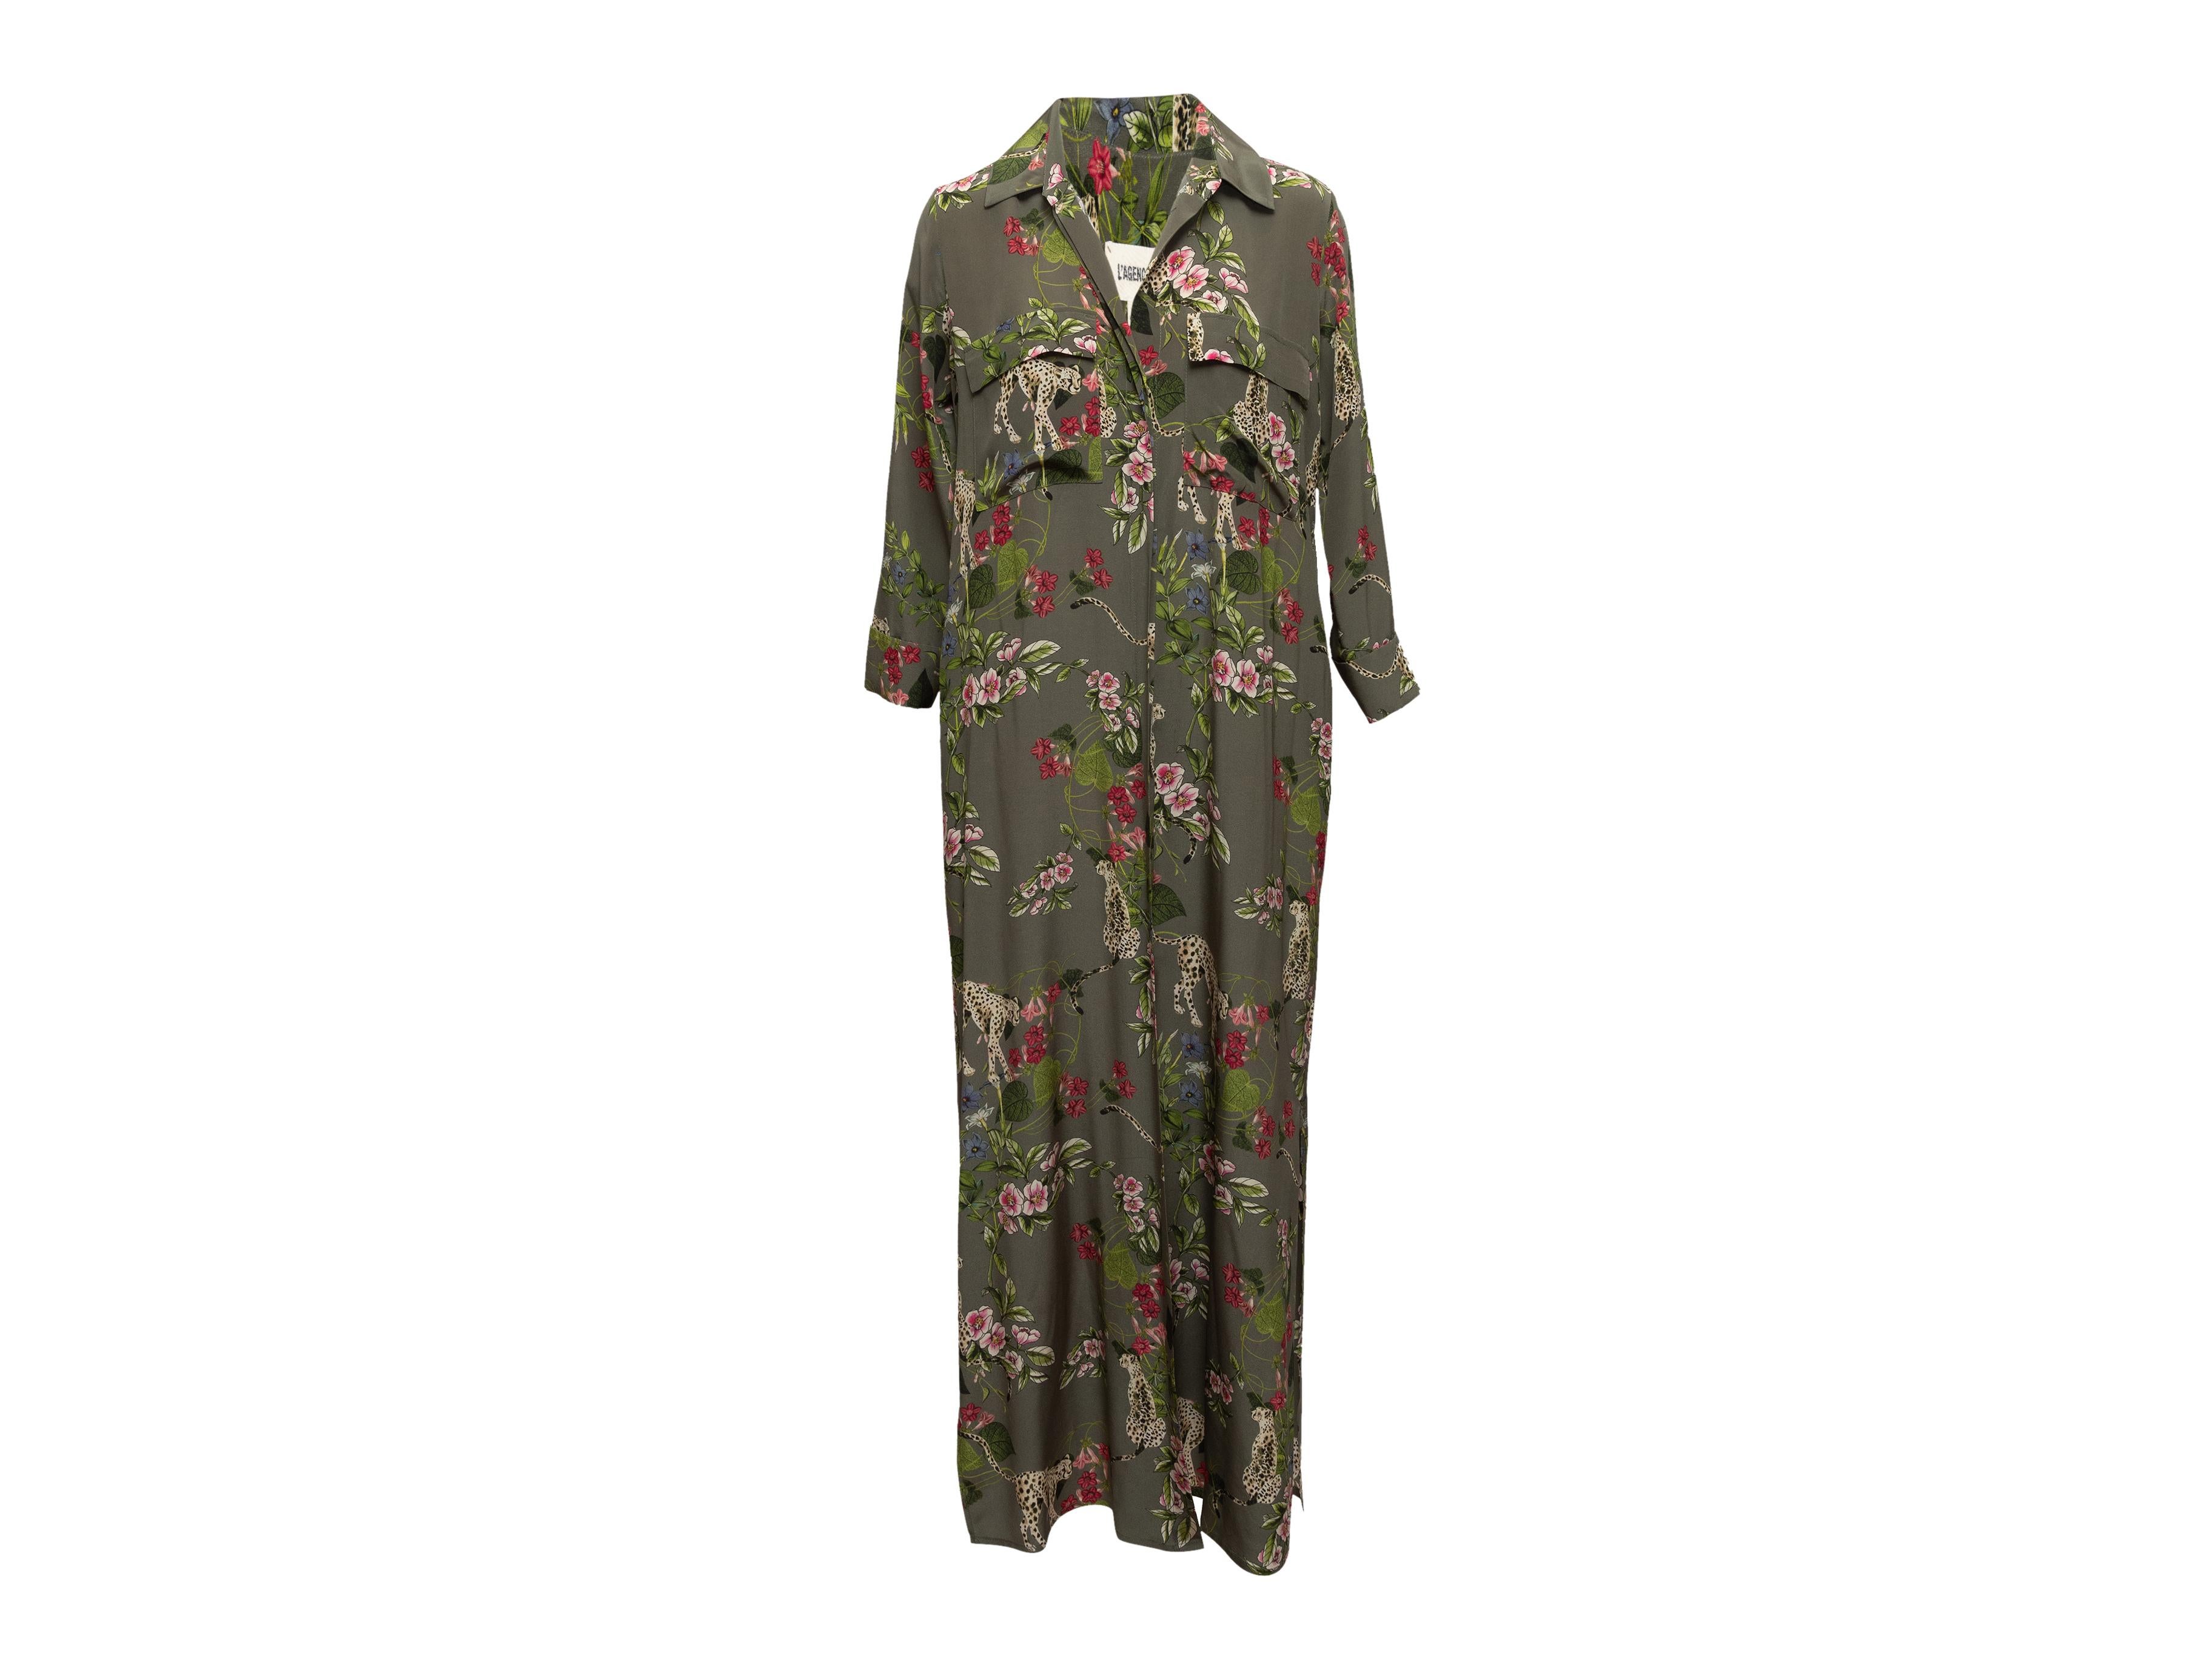 Olive and multicolor cheetah and floral print maxi dress by L'Agence. Pointed collar. Long sleeves. Dual bust pockets. Sash tie at waist. Concealed front closures. 40